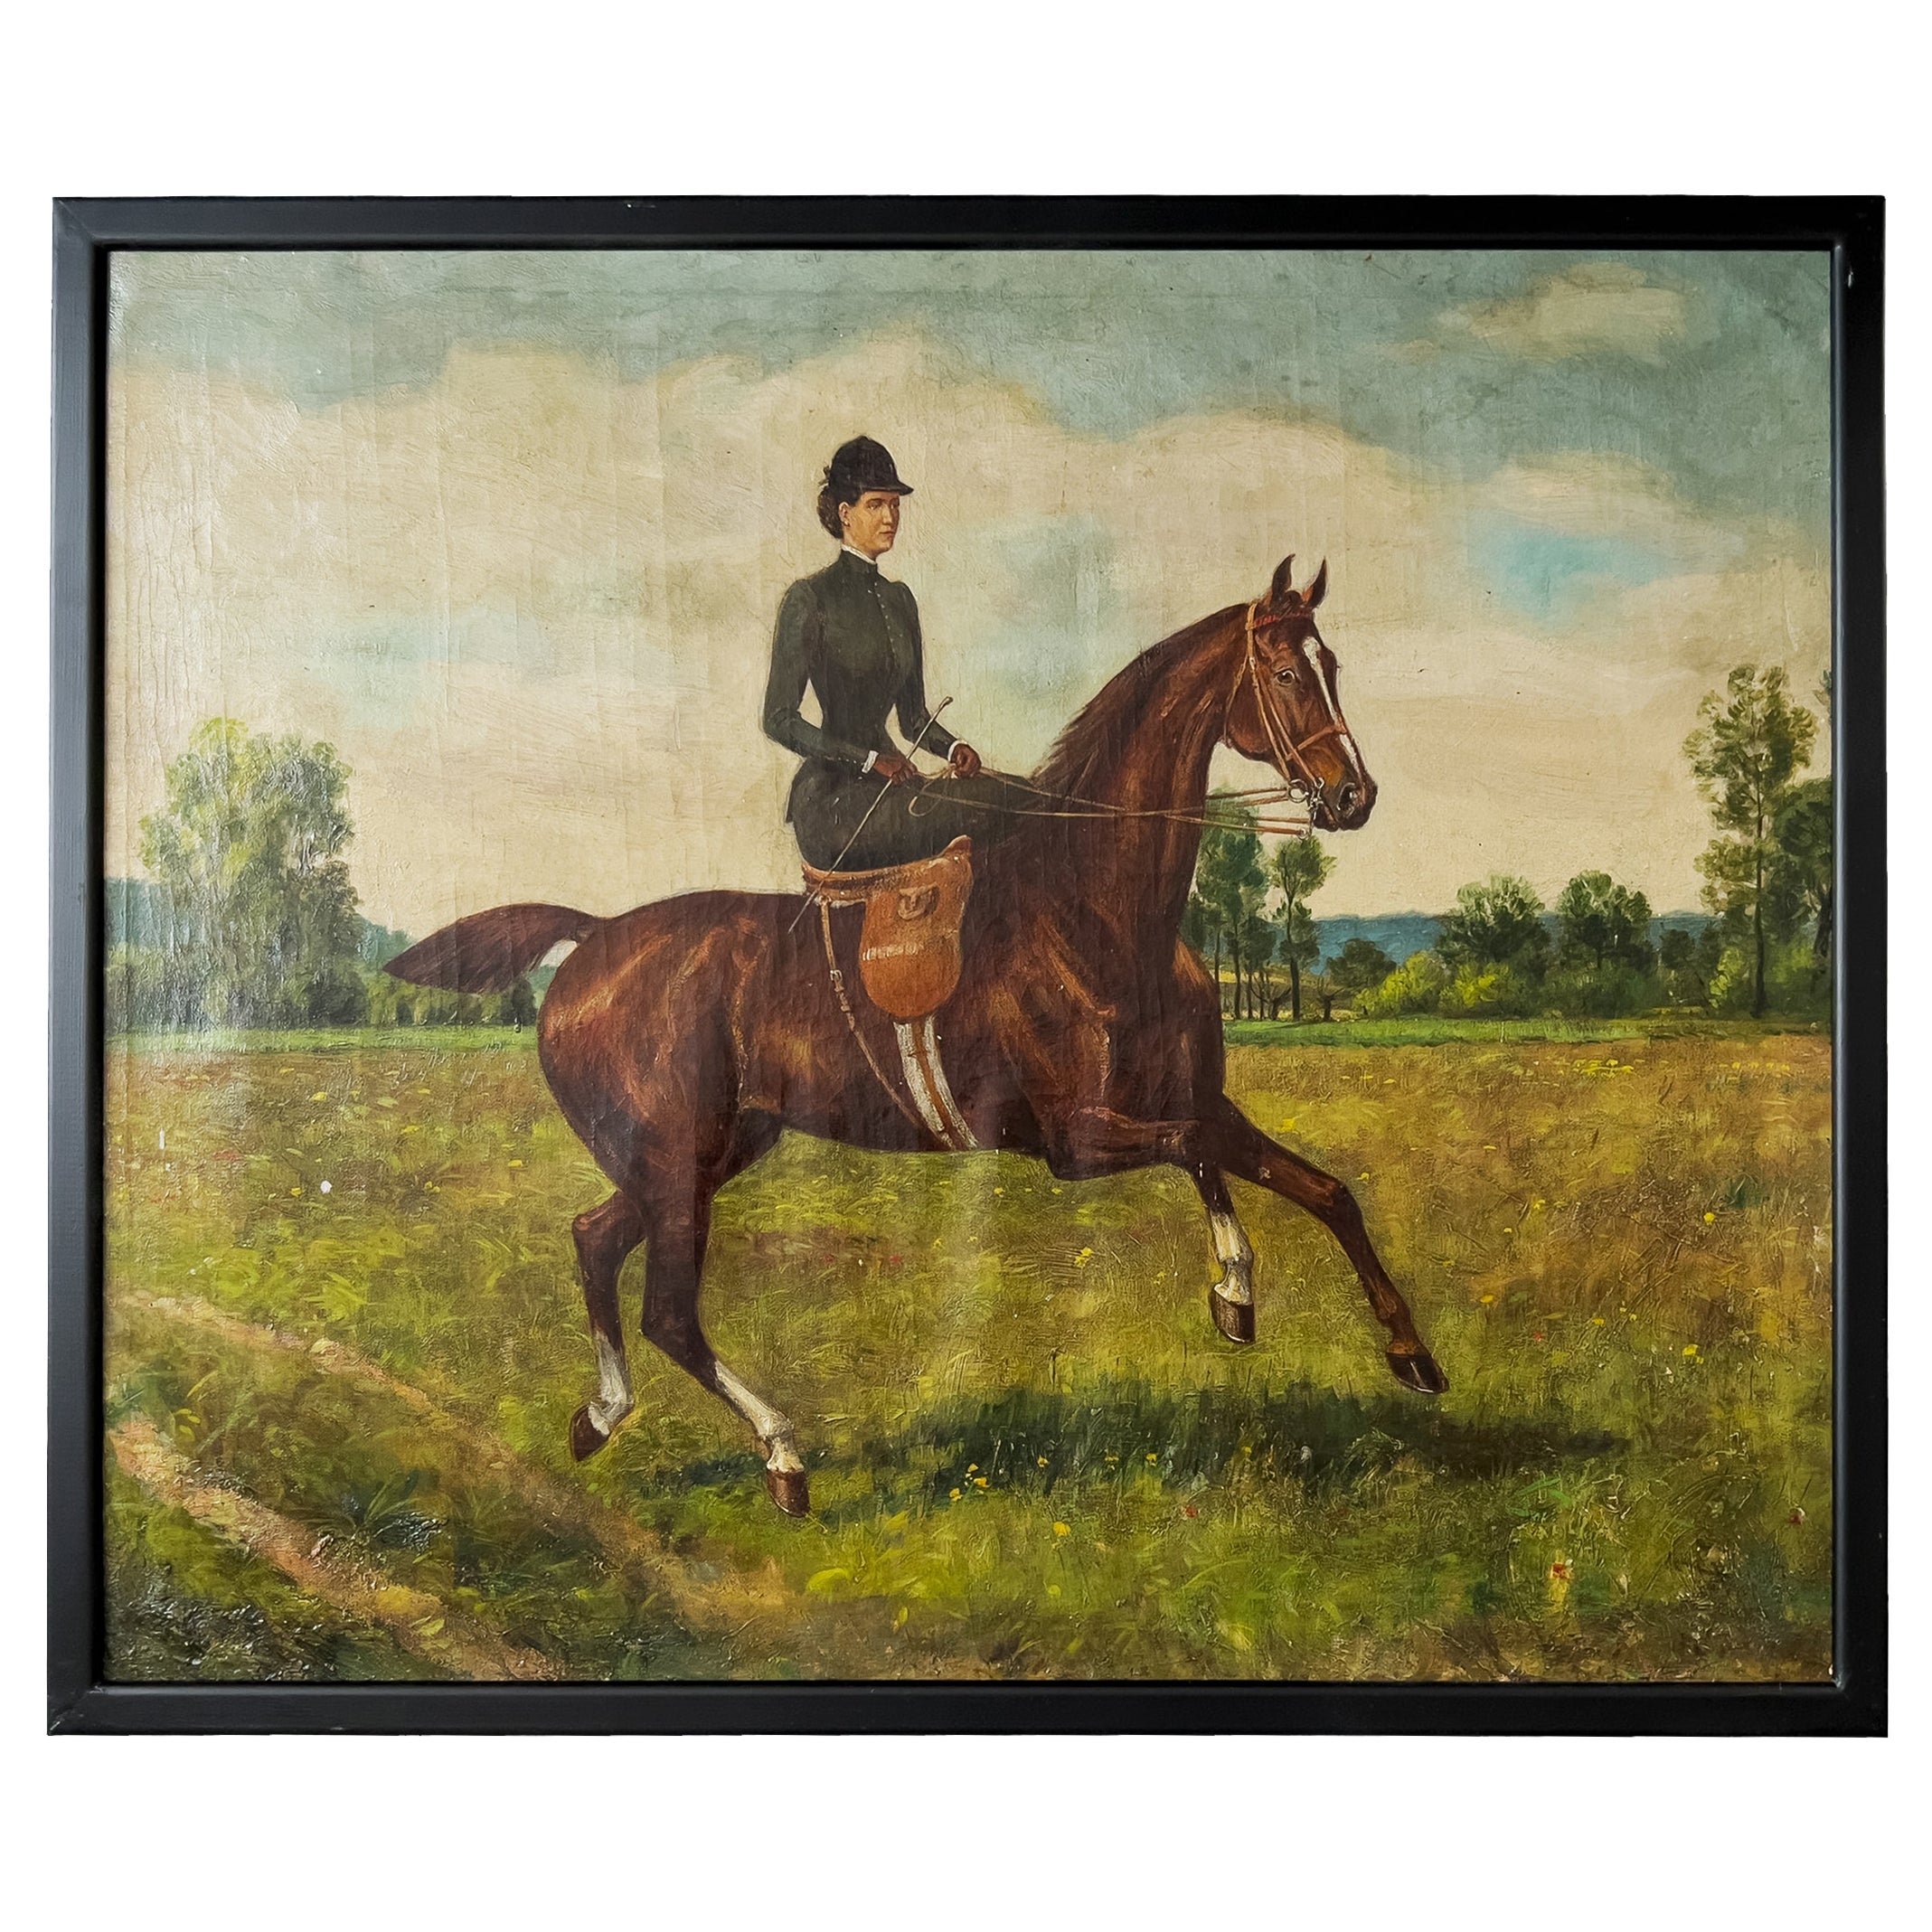 19th Century Oil on Canvas Painting of a Lady Riding a Horse Side Saddle